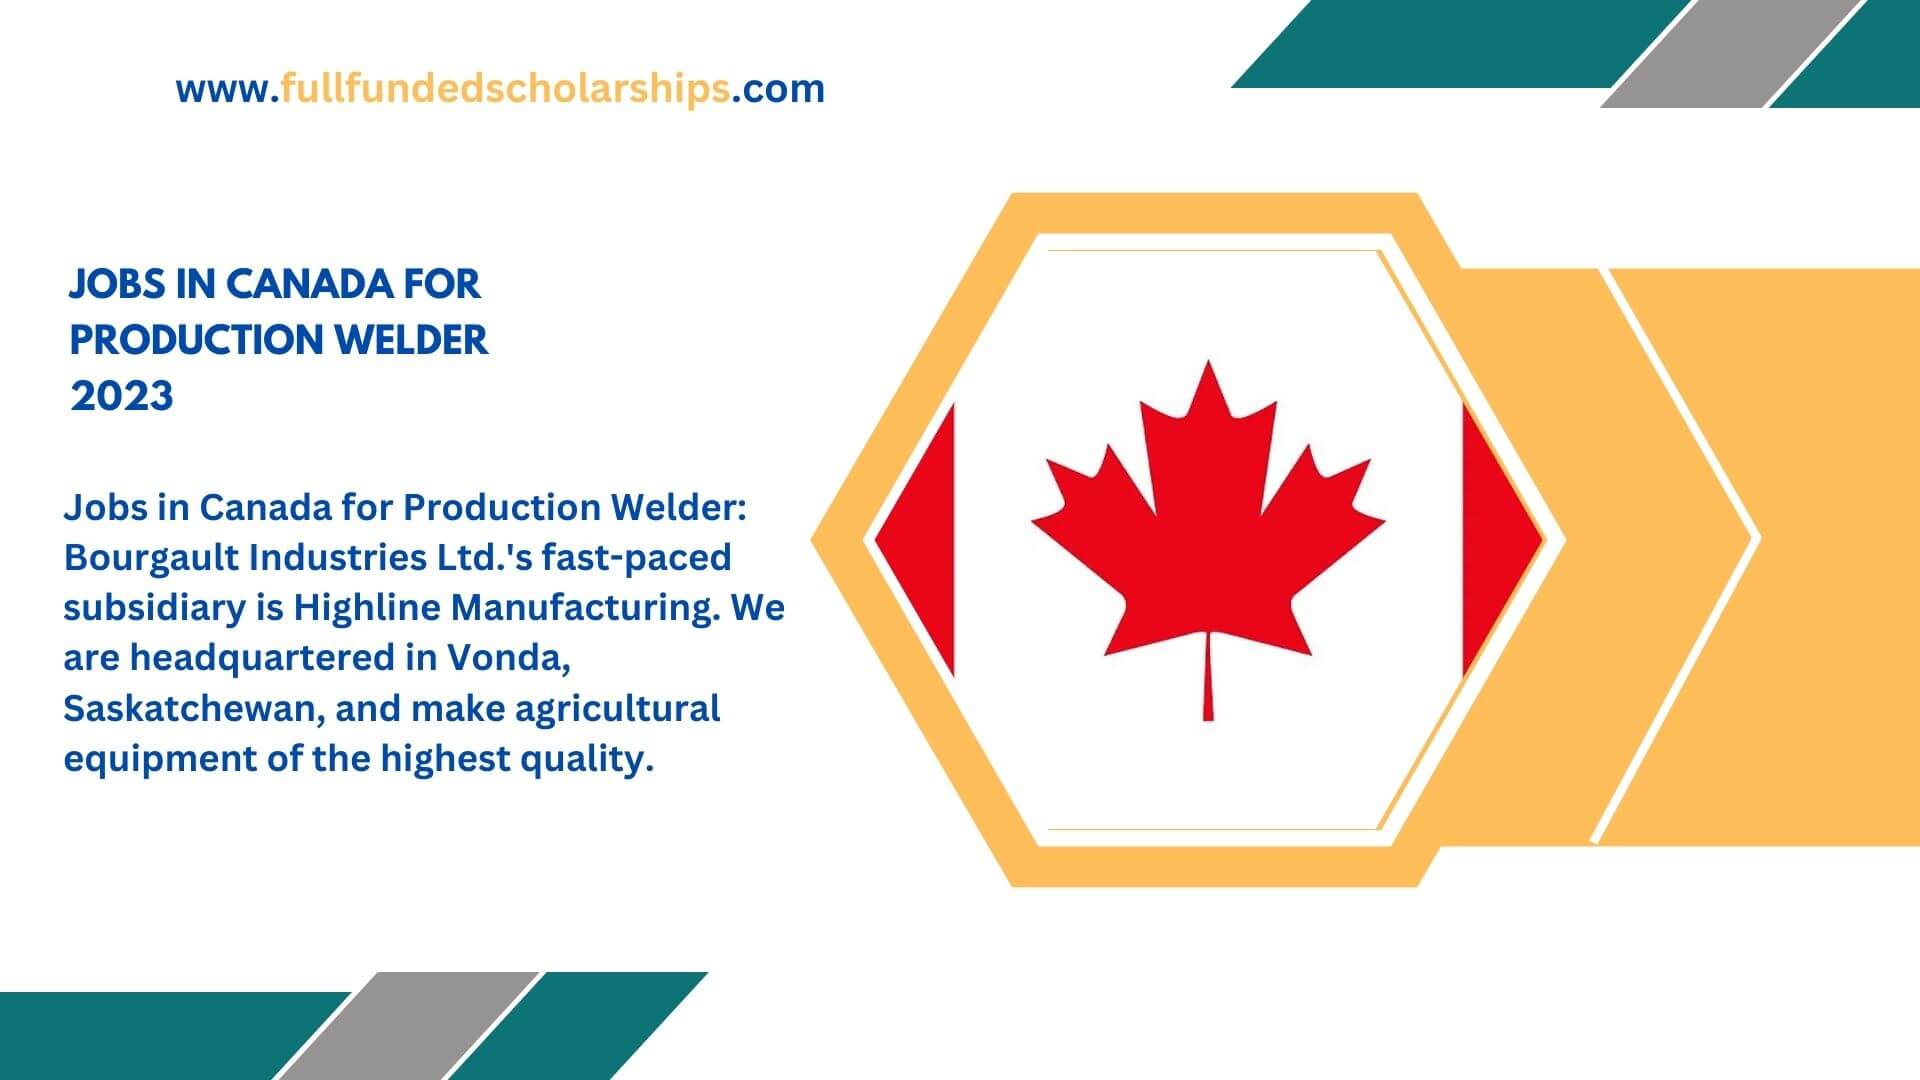 Jobs in Canada for Production Welder 2023